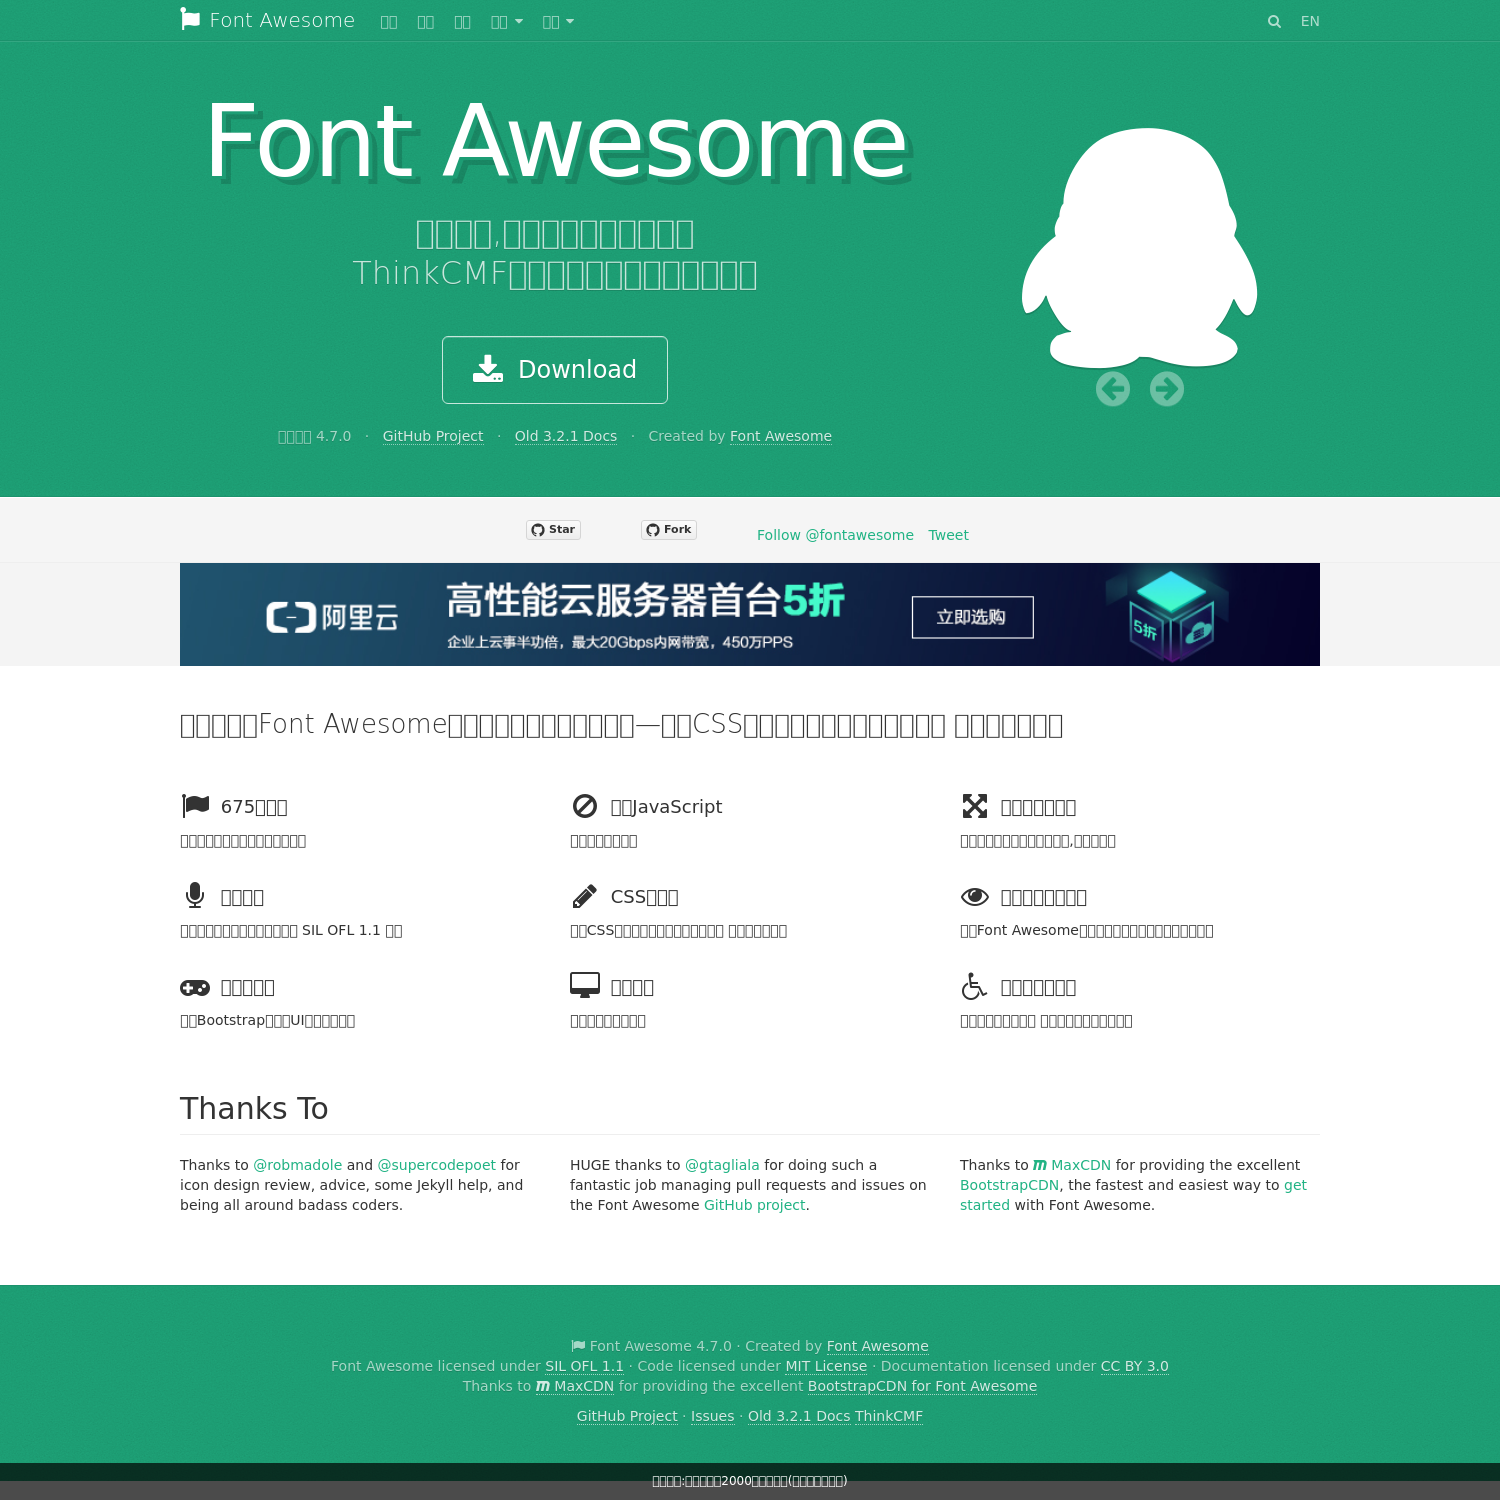 Font Awesome,奥森图标,Font Awesome 4.7.0,Font Awesome中文站,Font Awesome IE7兼容处理,Font Awesome图标搜索,Font Awesome中文站-ThinkCMF
